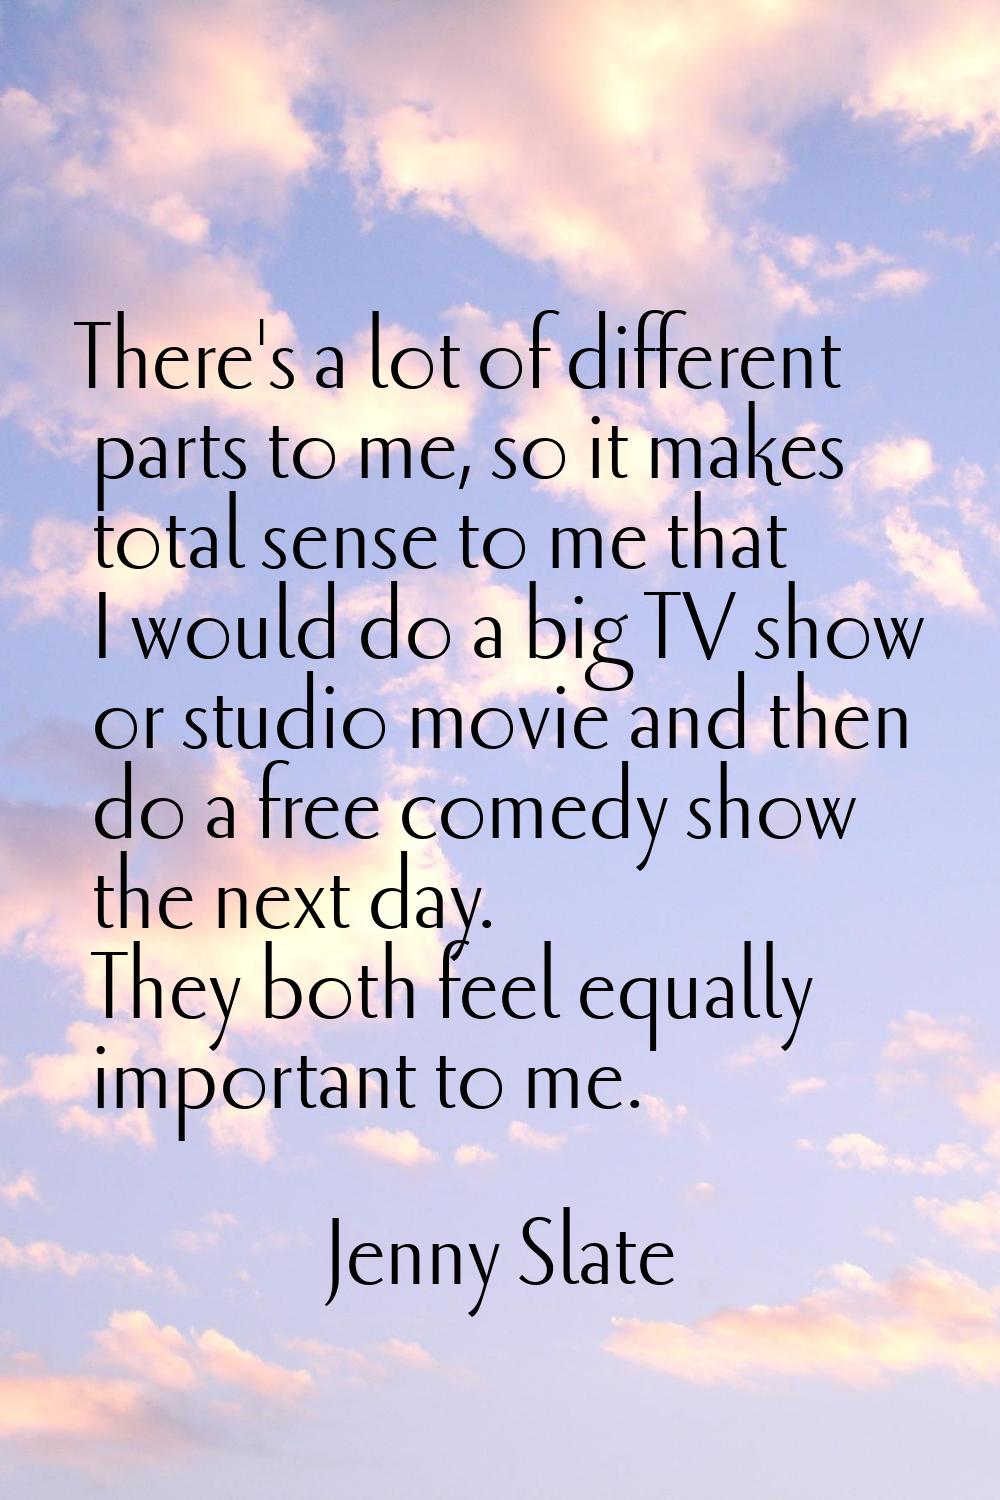 There's a lot of different parts to me, so it makes total sense to me that I would do a big TV show